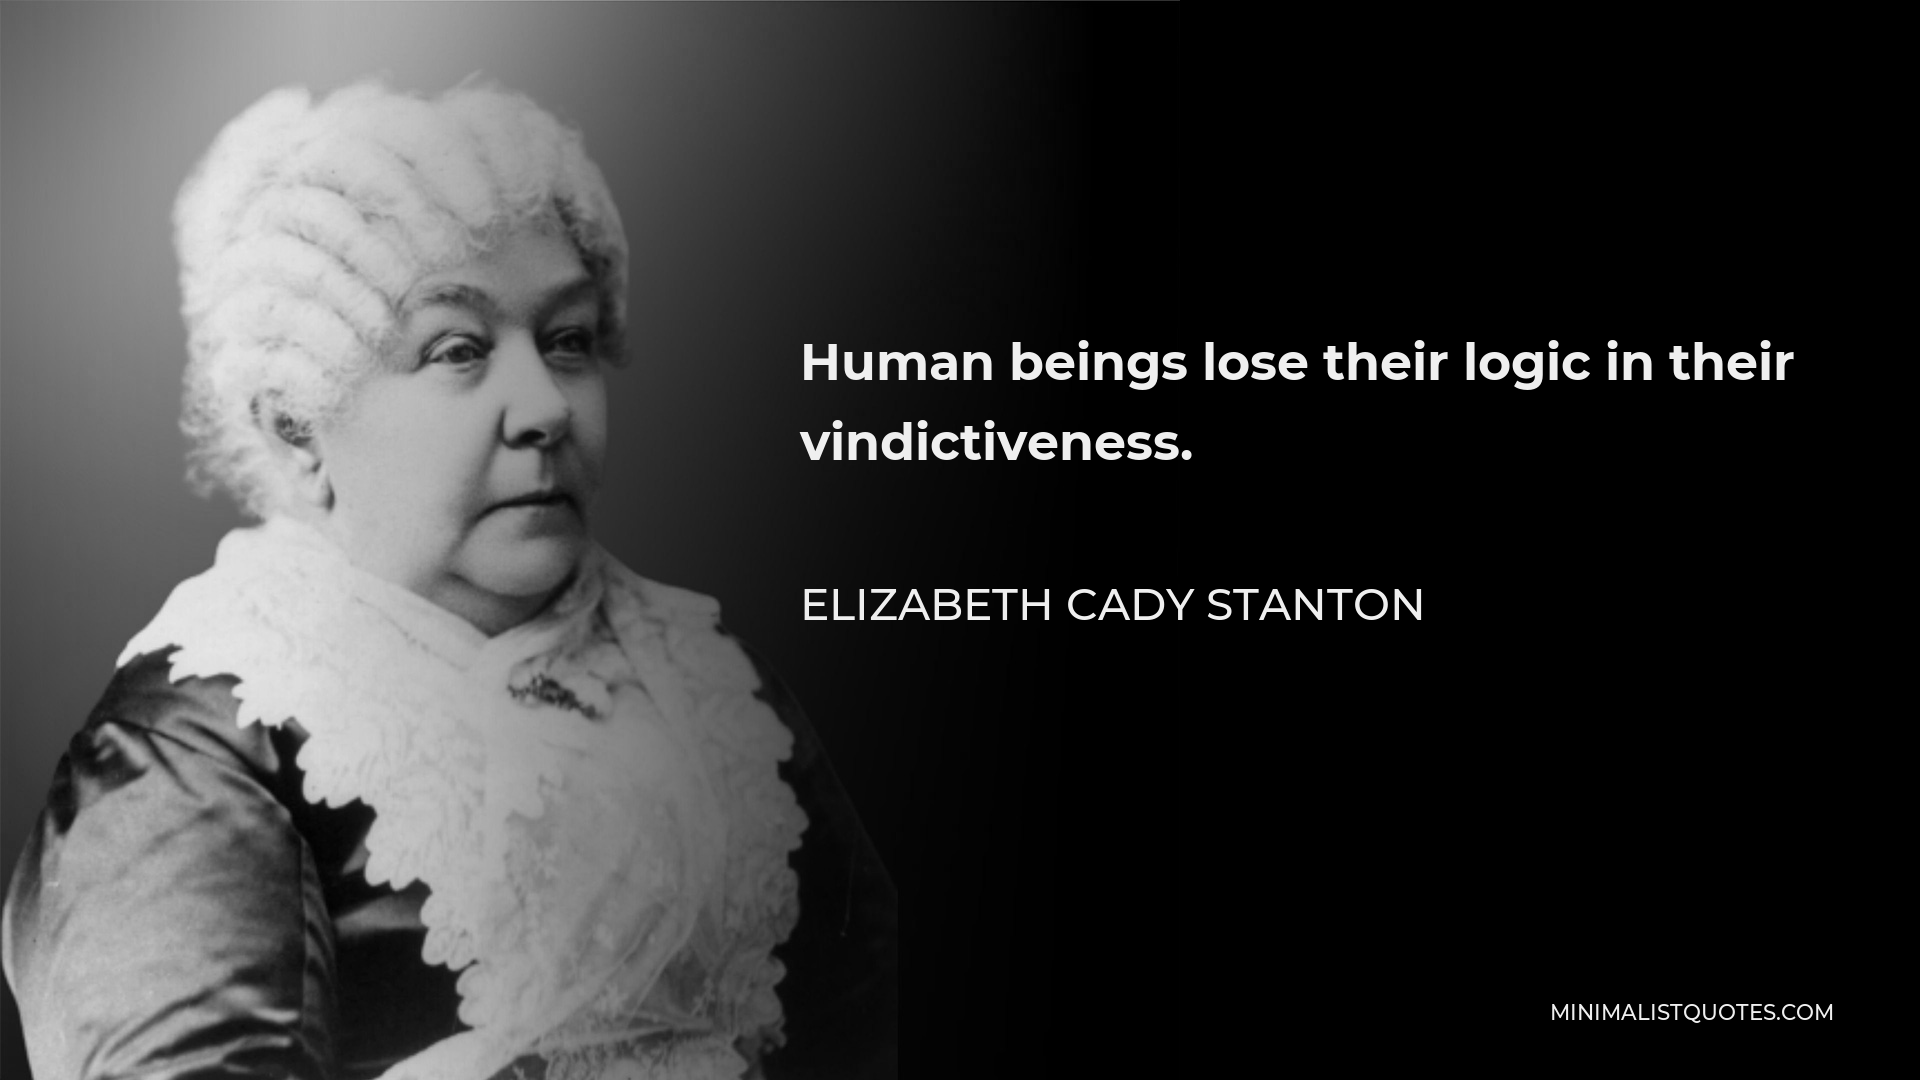 Elizabeth Cady Stanton Quote - Human beings lose their logic in their vindictiveness.